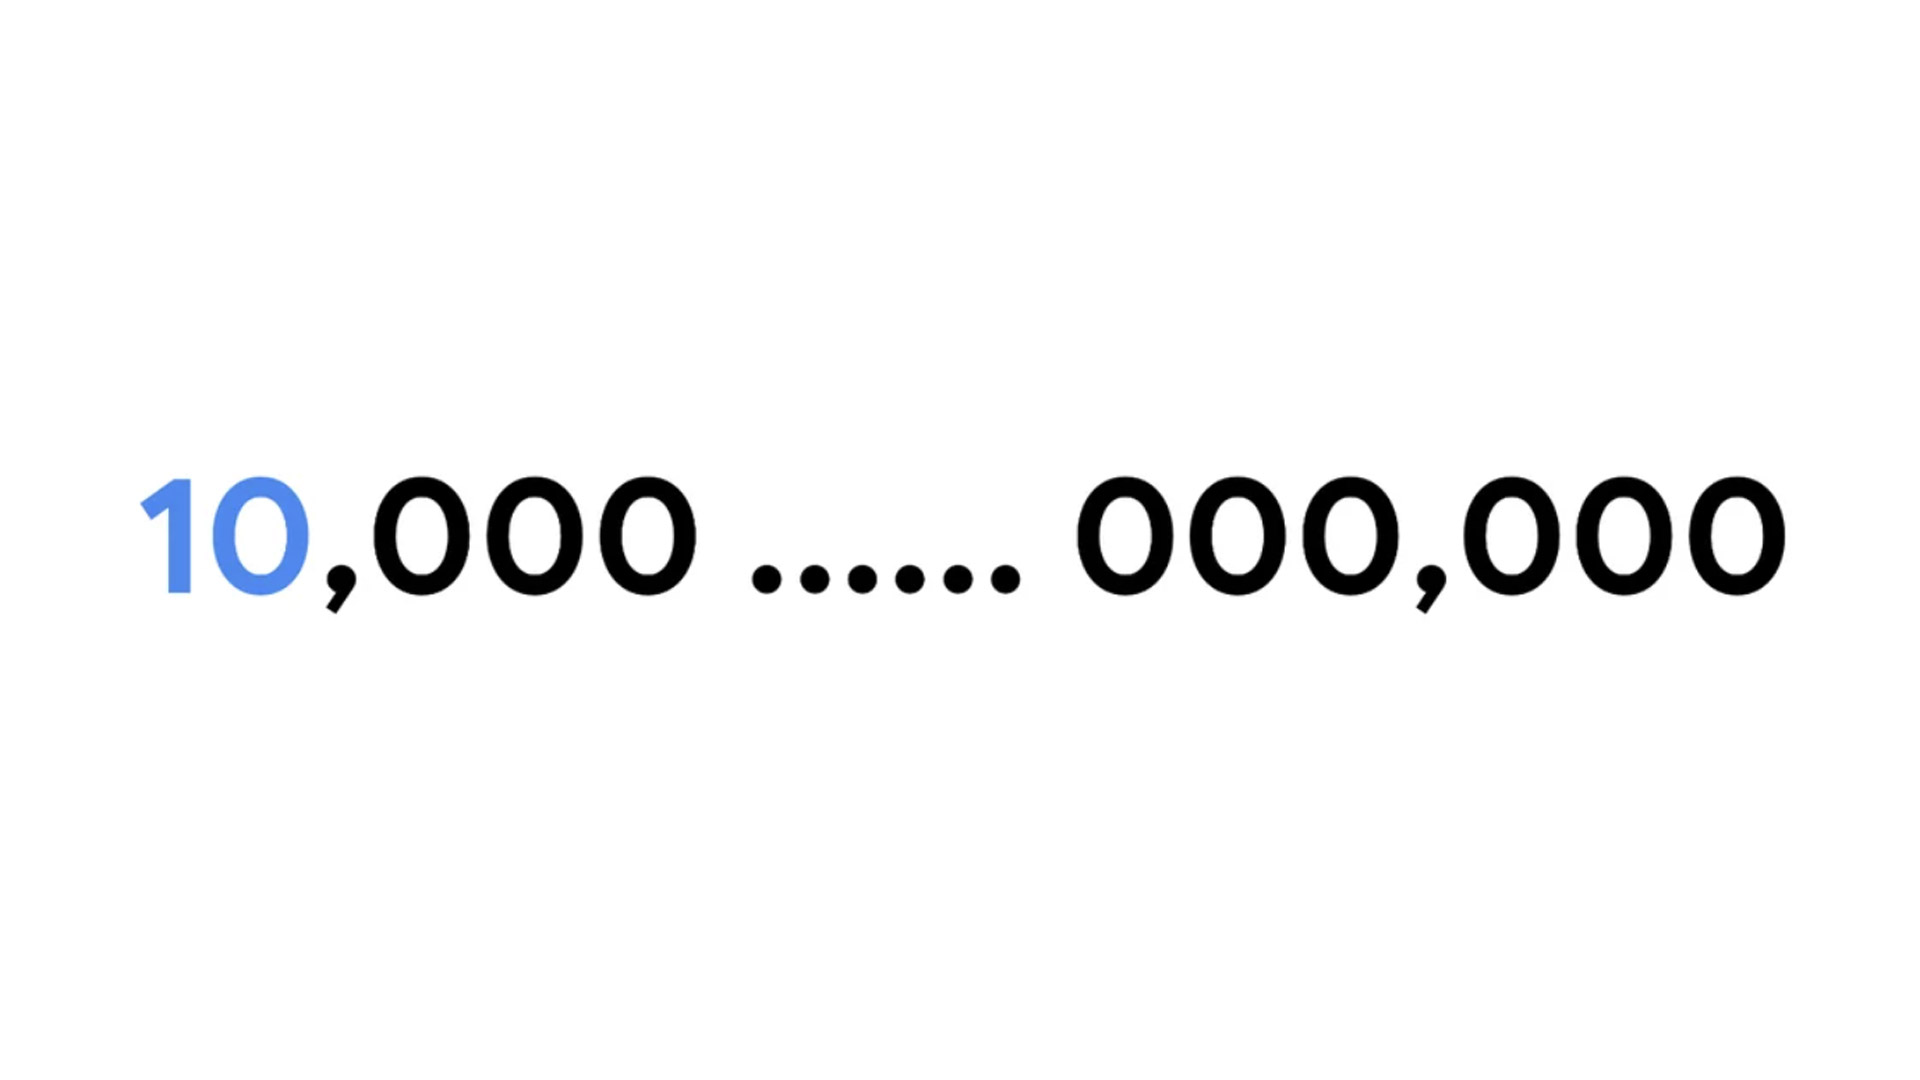 A googol number truncated so it can fit on a single screen